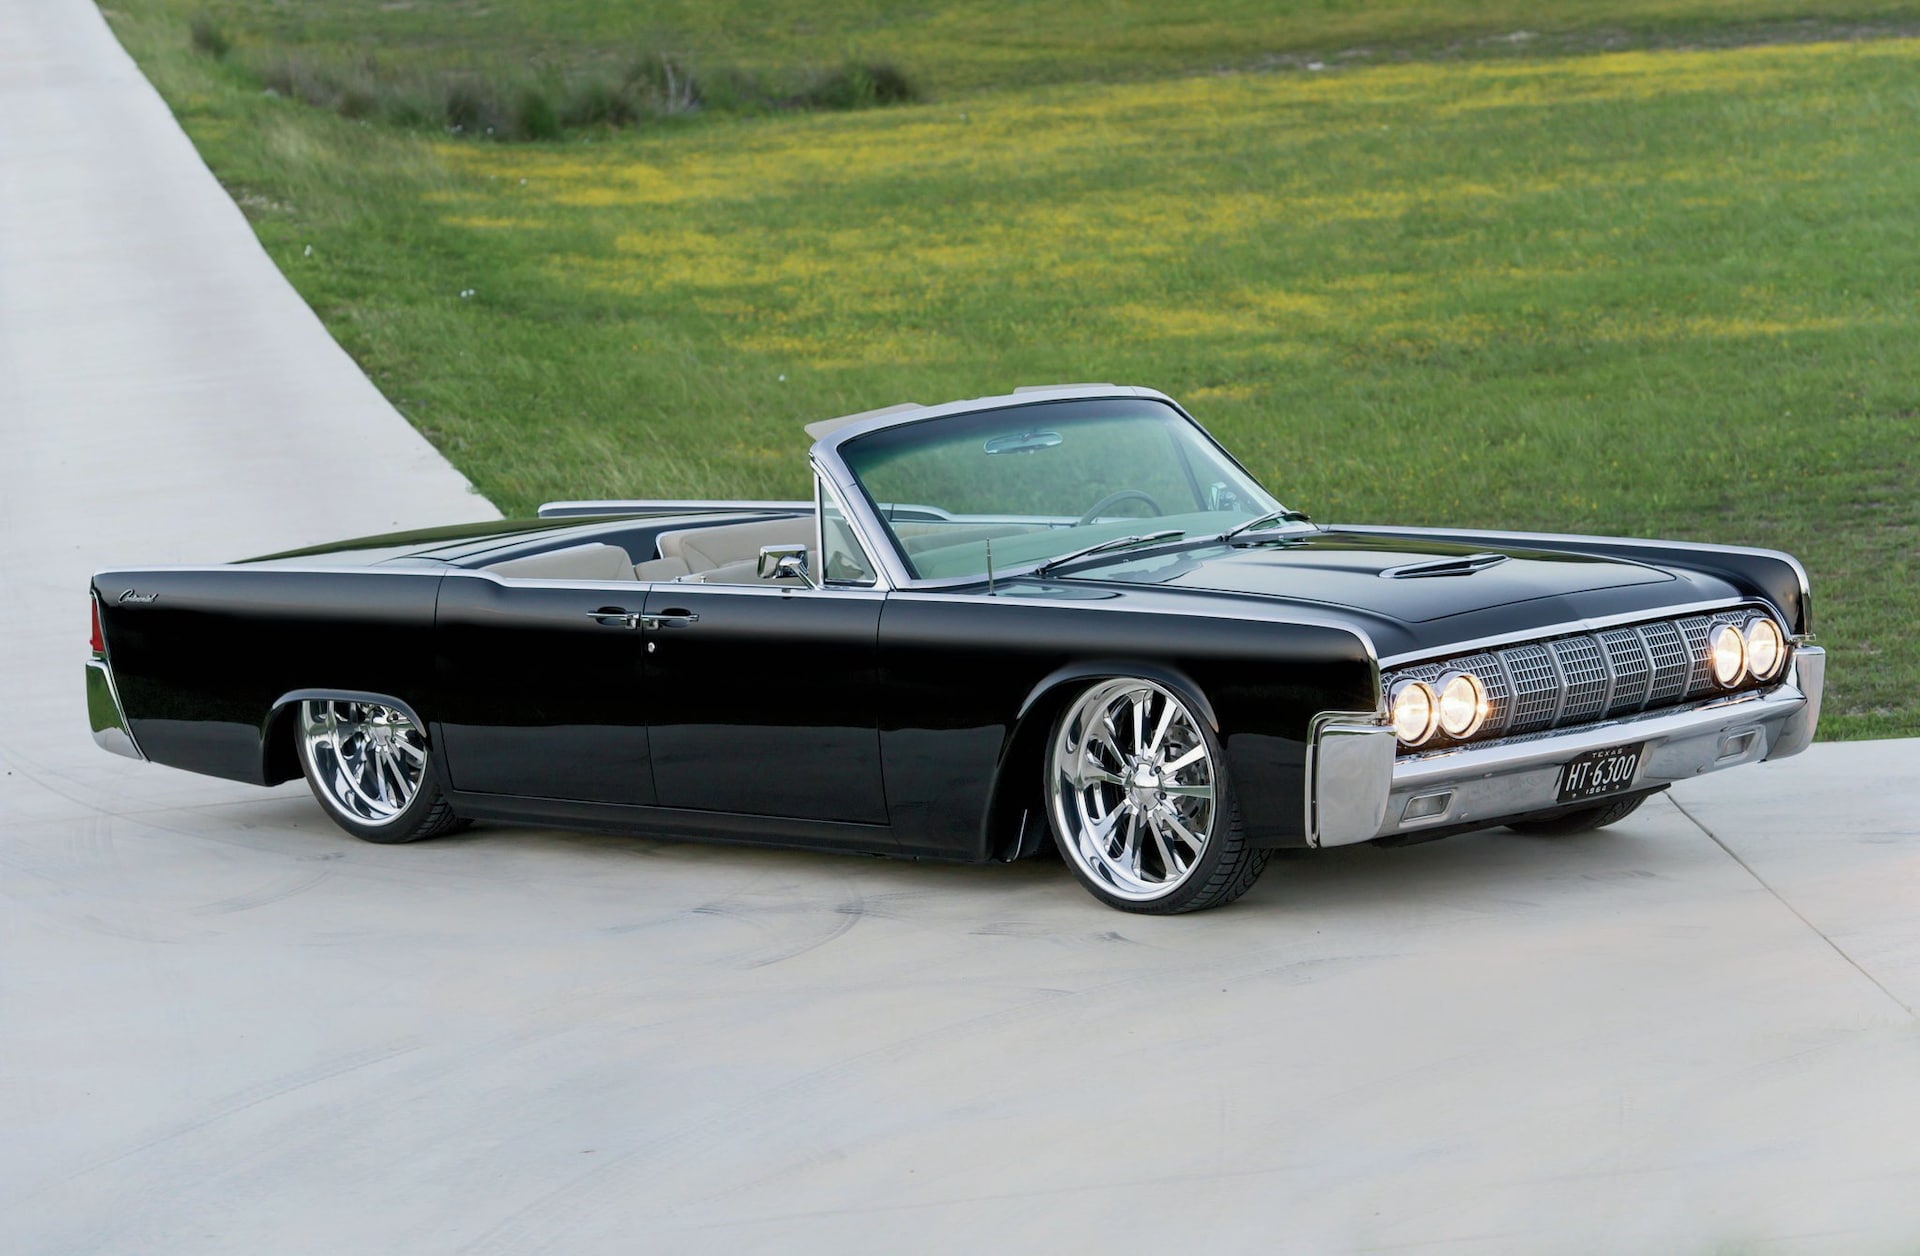 1961 Lincoln Continental - The Continental